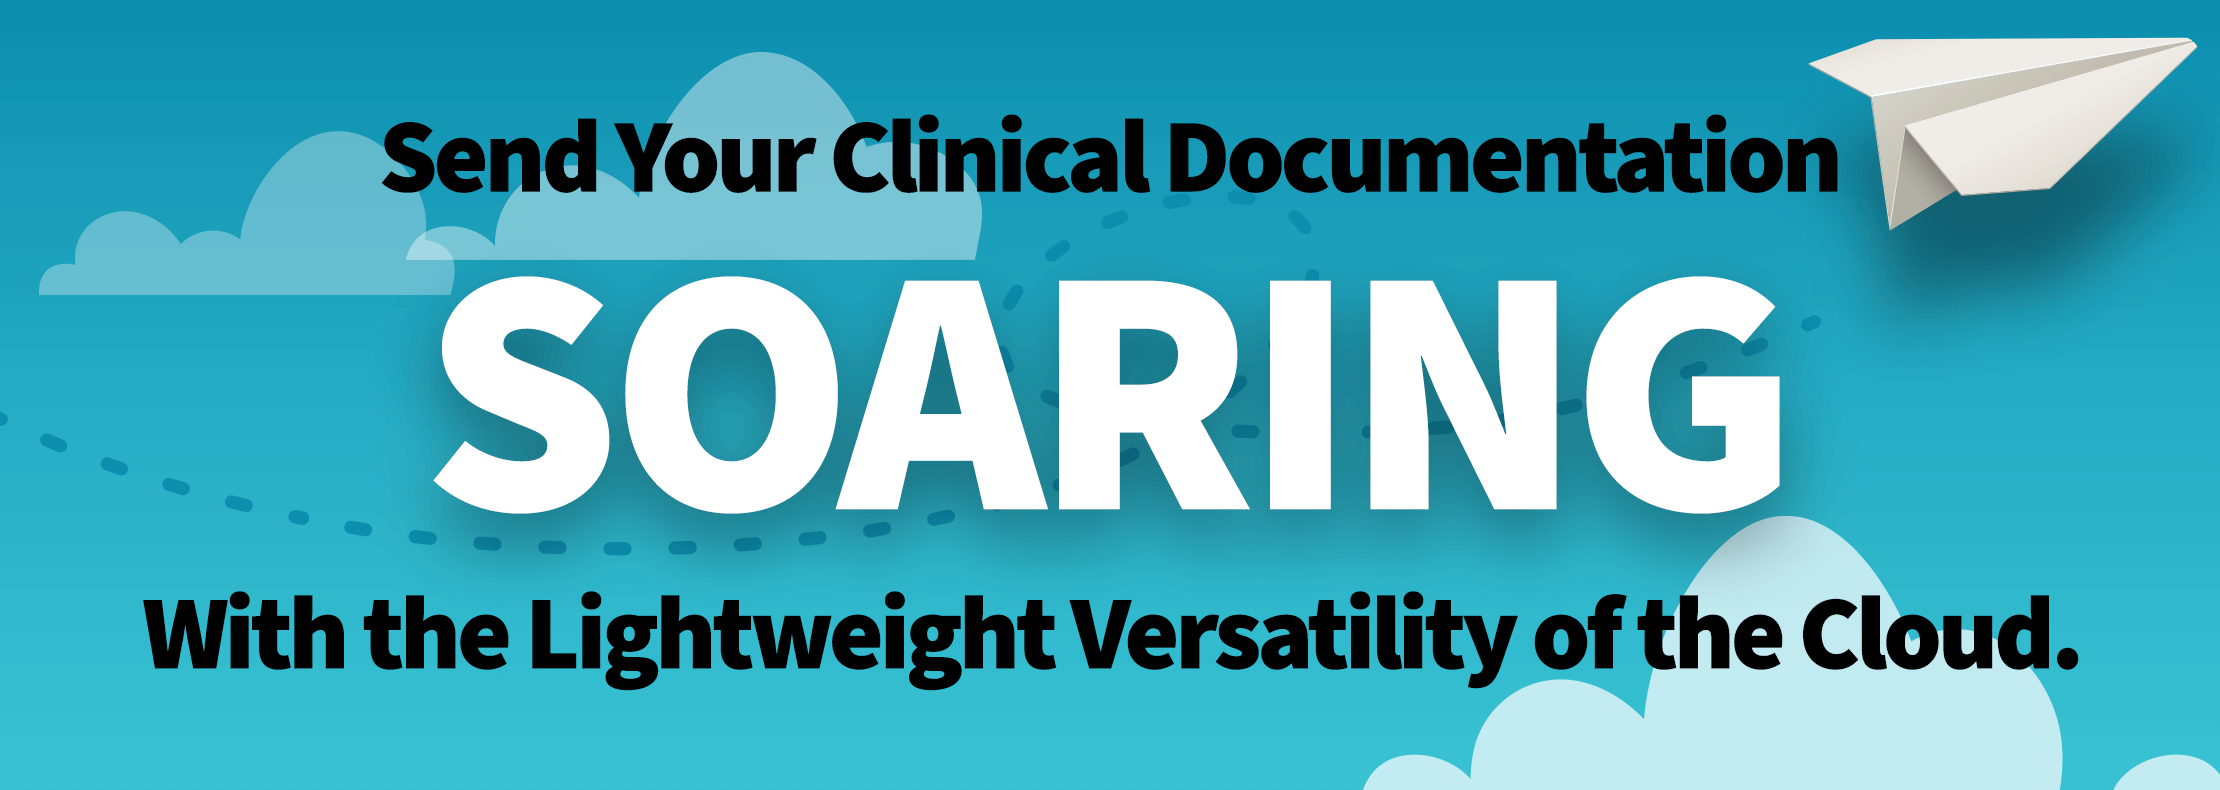 Send Your Clinical Documentation Soaring With the Lightweight Versatility of the Cloud.